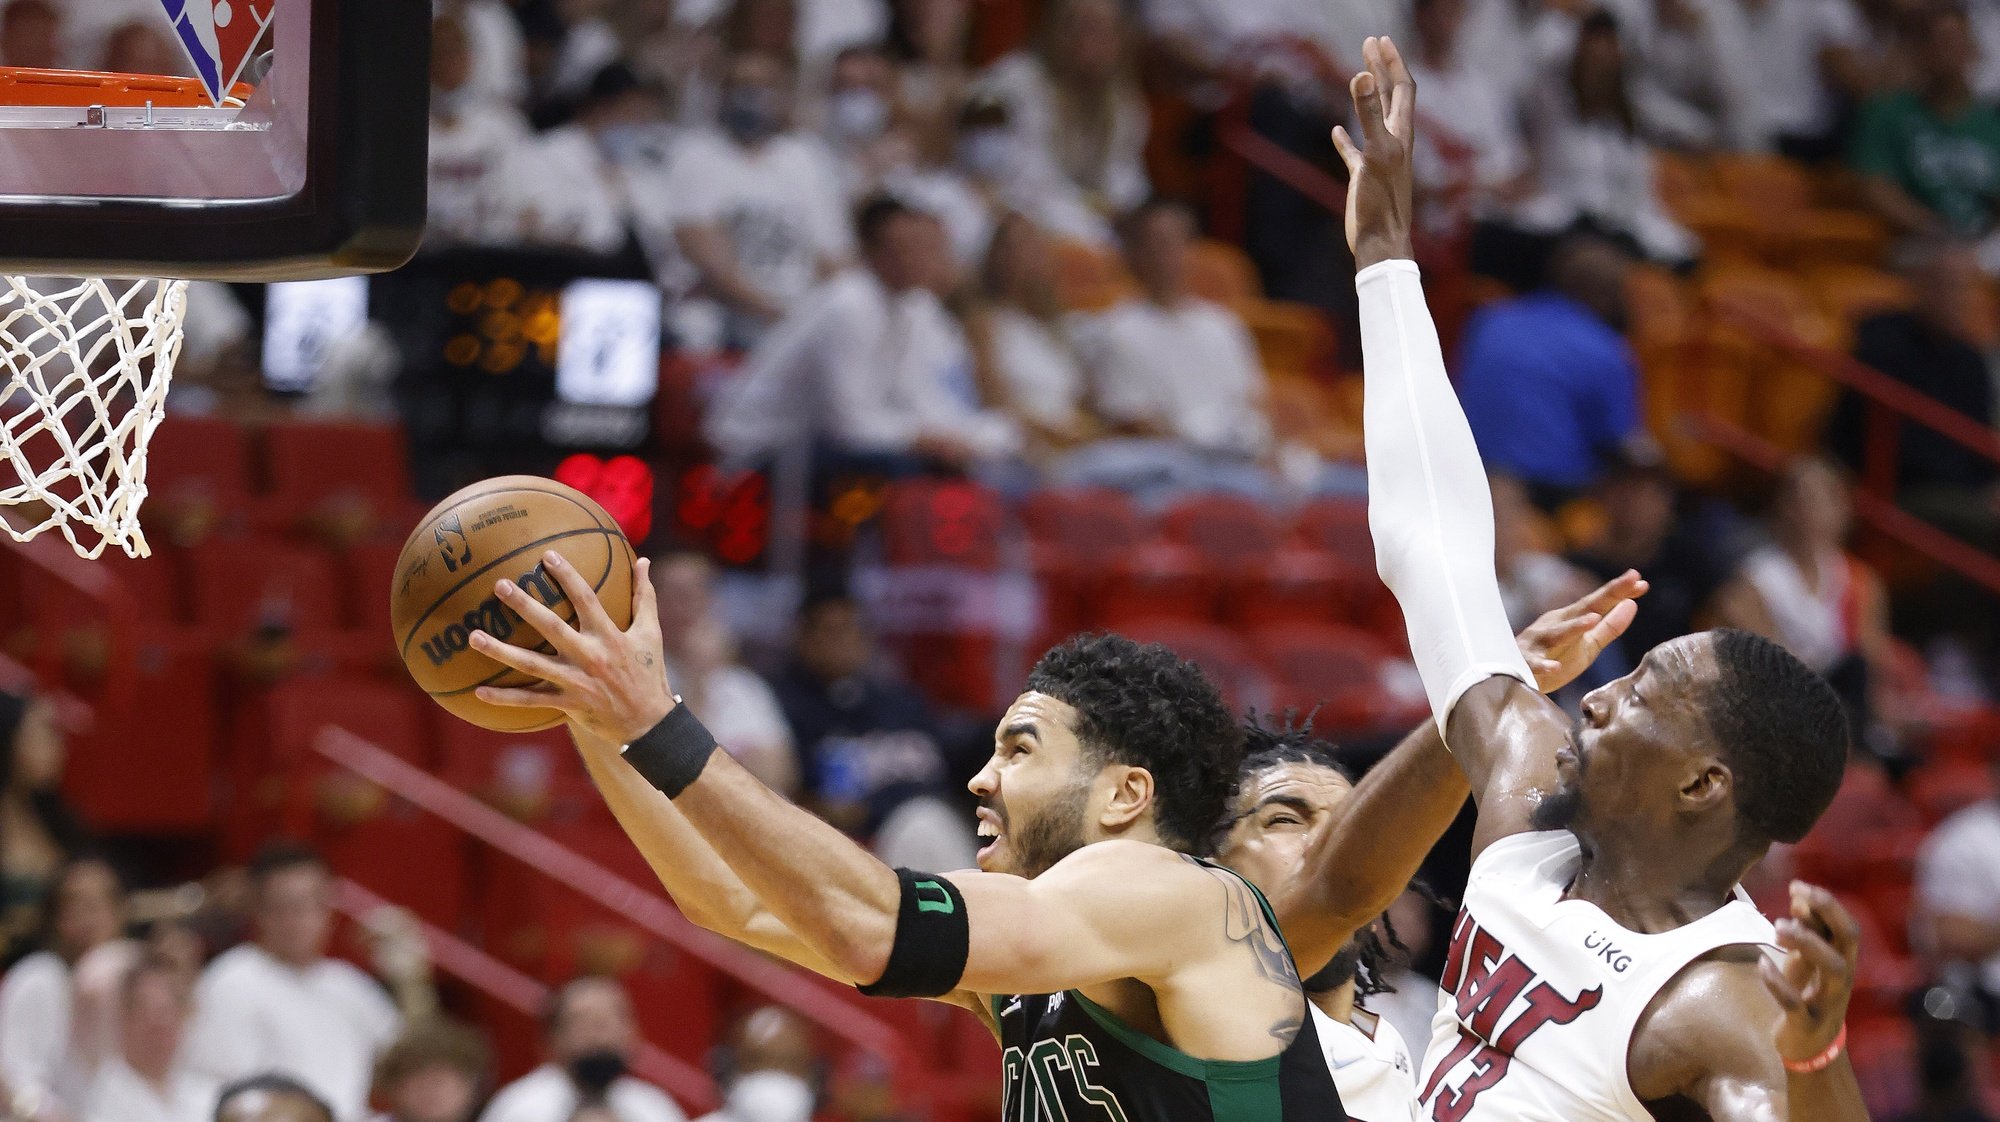 epa09976250 Boston Celtics forward Jayson Tatum (L), shoots around Miami Heat center Bam Adebayo (R), and guard Gabe Vincent (C), during the second half of Game 5 of the NBA Eastern Conference Finals series between the Miami Heat and the Boston Celtics at FTX Arena, in Miami, Florida USA, 25 May 2022.  EPA/RHONA WISE  SHUTTERSTOCK OUT